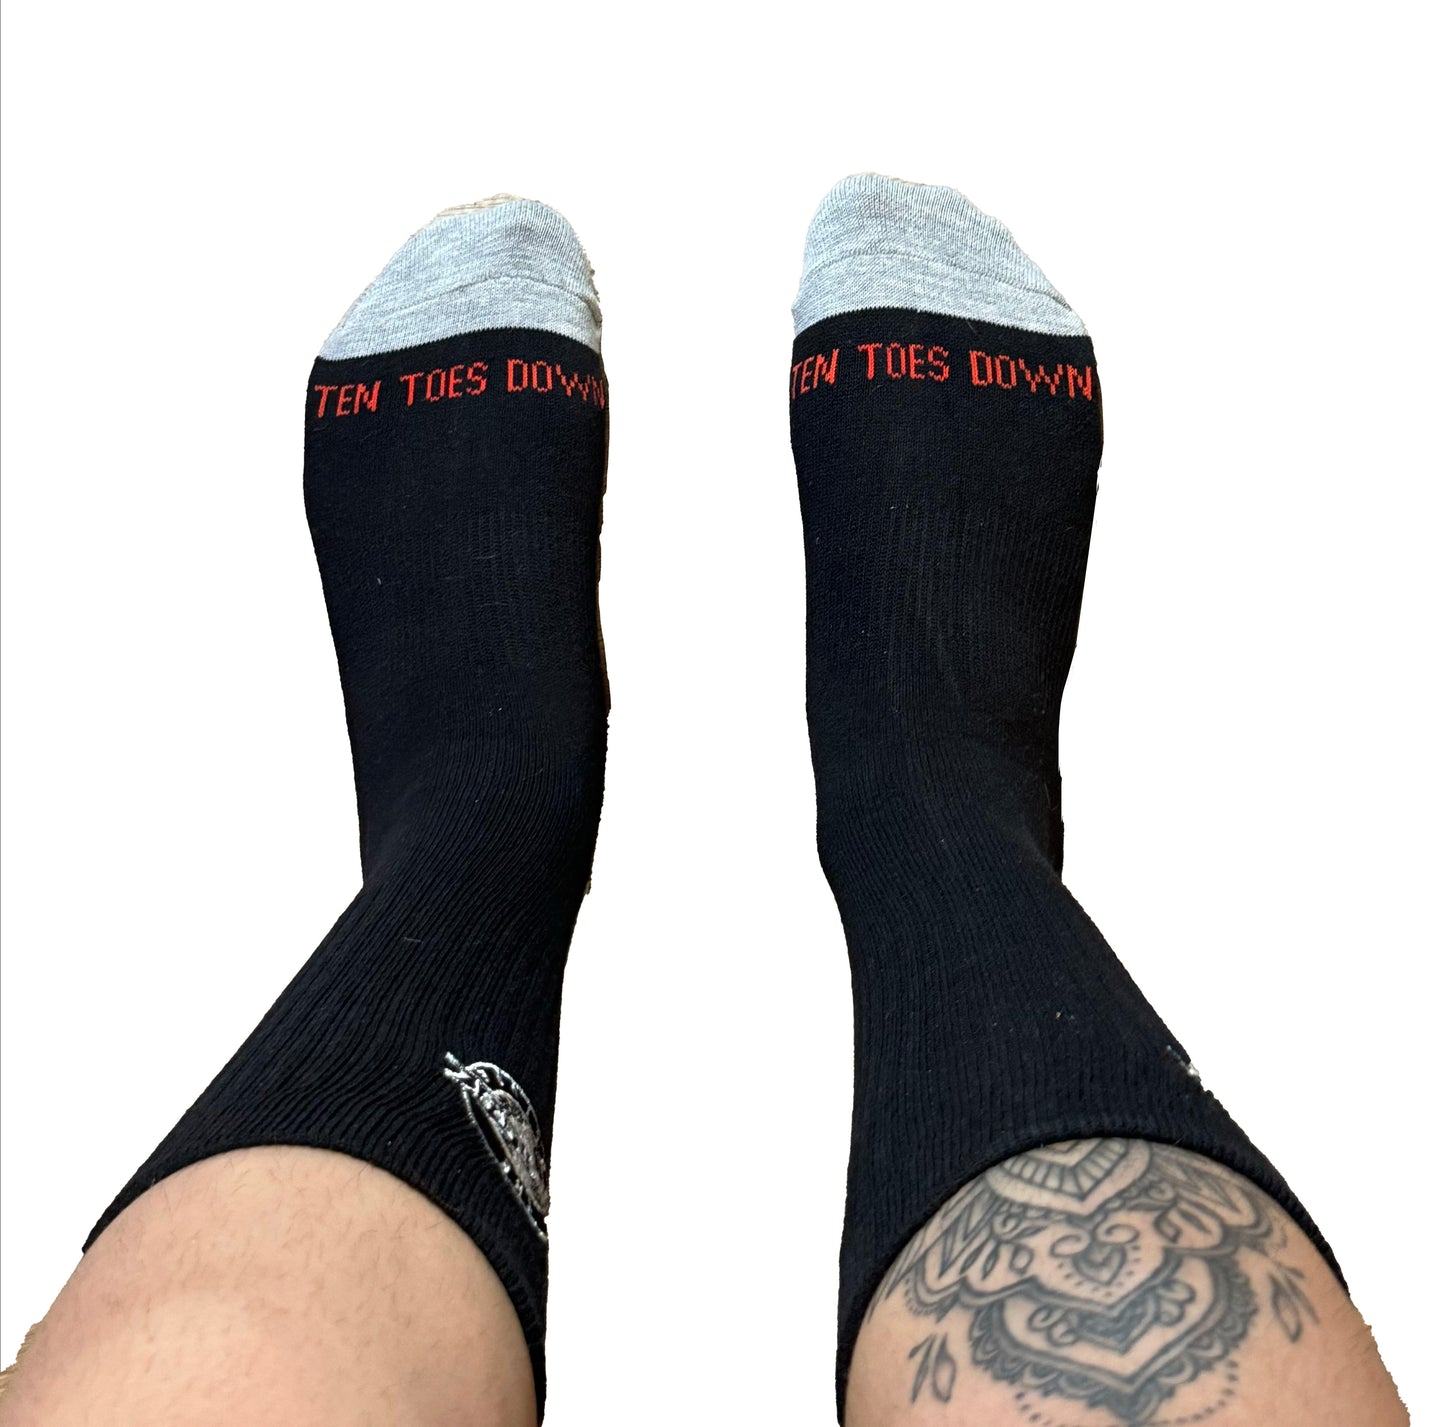 Embroidered "Ten Toes Down" Black Socks